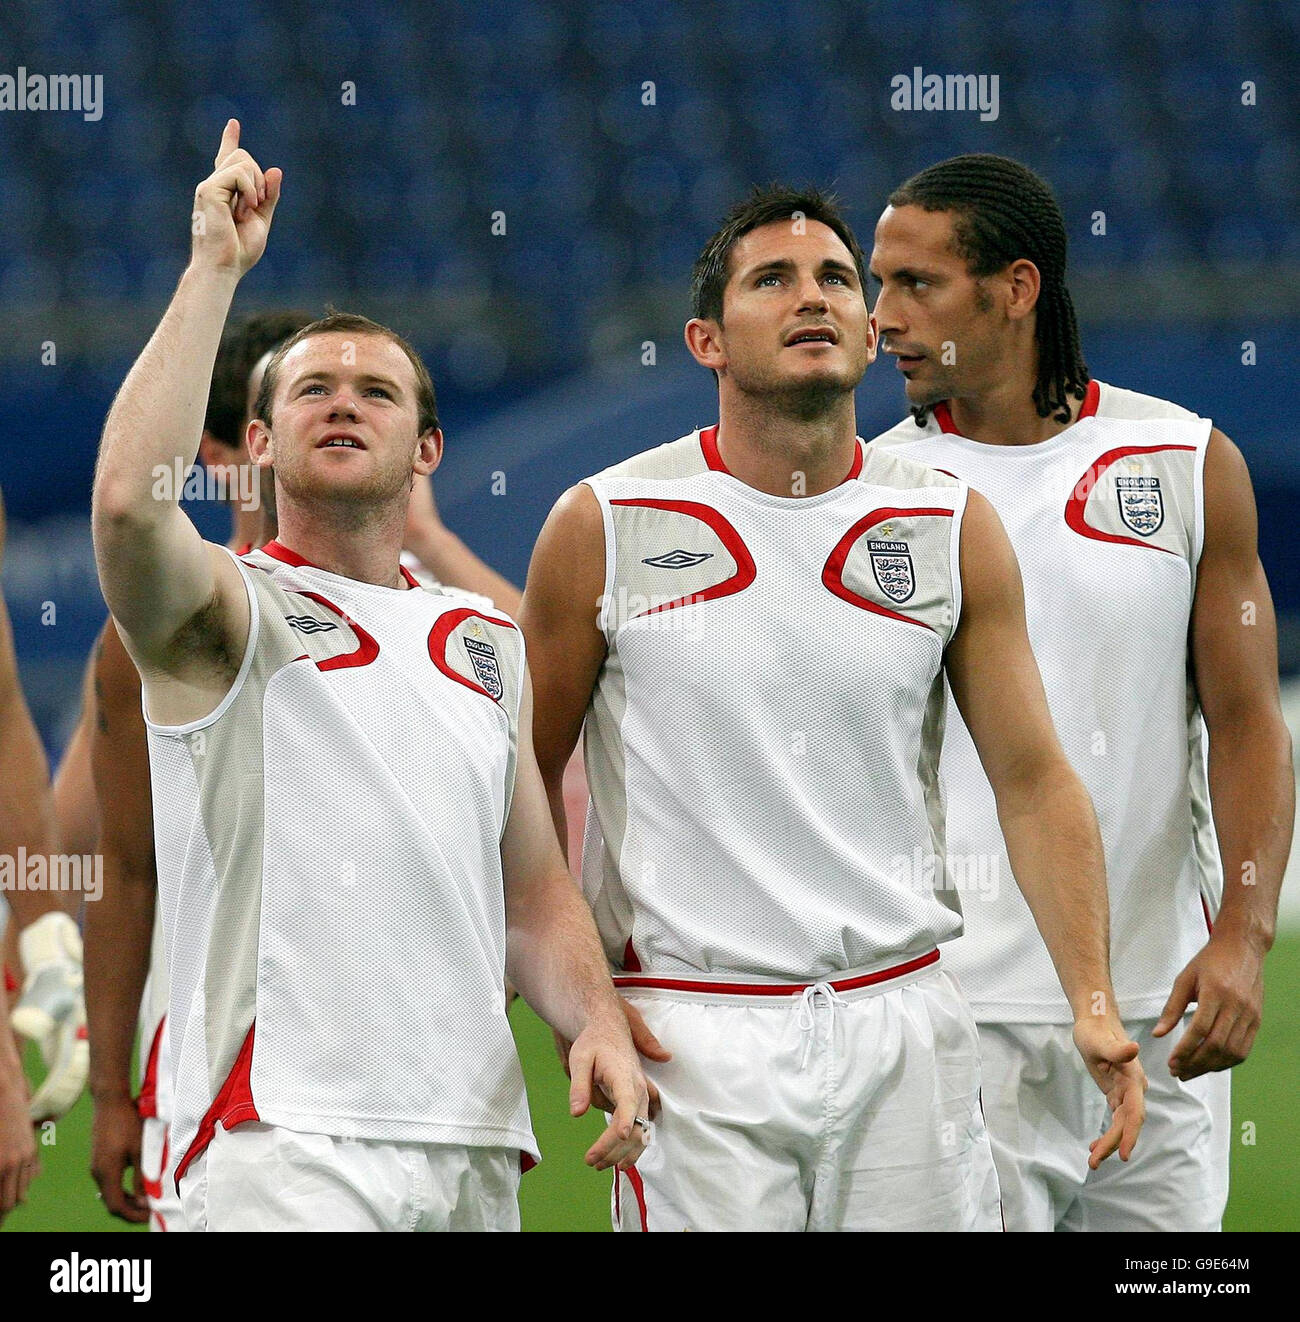 England's Wayne Rooney (left), Frank Lampard and Rio Ferdinand (right) during a training session at the FIFA World Cup Stadium in Gelsenkirchen, Germany. Picture date: Friday June 30, 2006. England play Portugal in their Quarter Final match tomorrow. Photo credit should read: Martin Rickett/PA. 'This image may only be used in (i) wire services, newspapers, magazines, newspaper or magazine supplements and (ii) any internet version of such newspapers, magazines or supplements, or other editorial internet sites provided that these are not intended for, or promoted as being available for, mobile Stock Photo